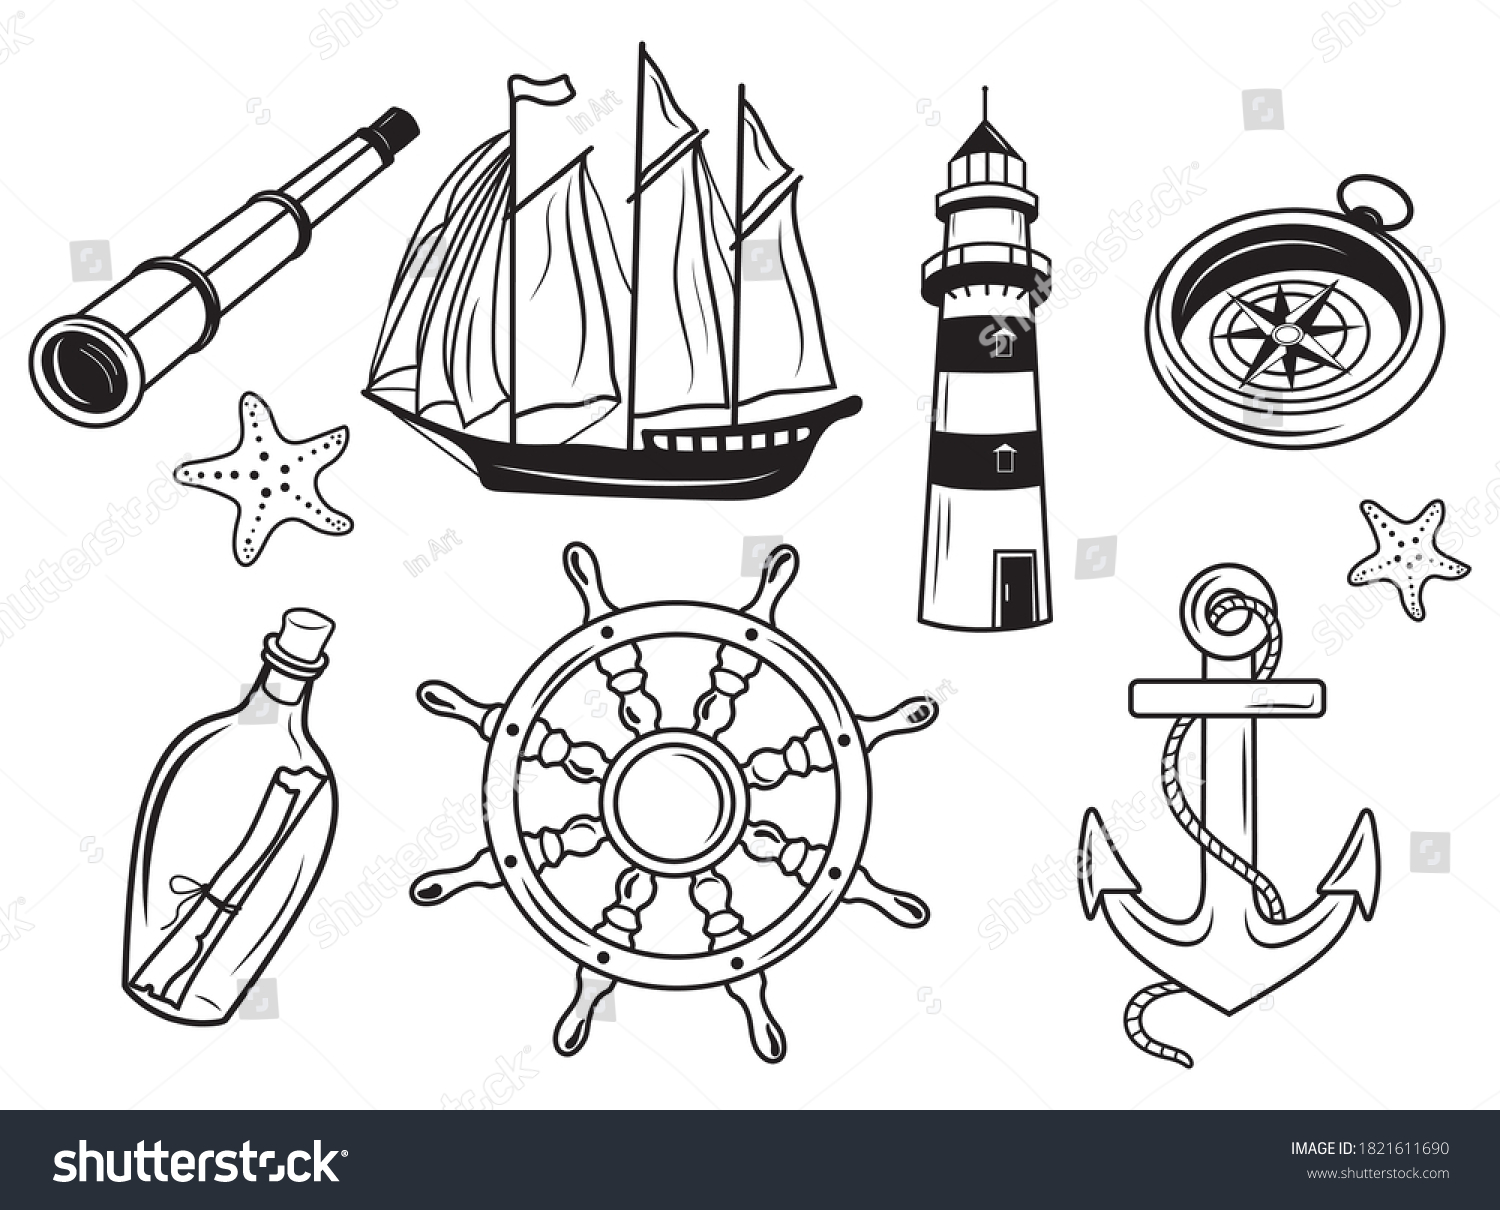 Stylized Nautical Set Collection Items Marine Stock Vector Royalty Free 1821611690 Shutterstock